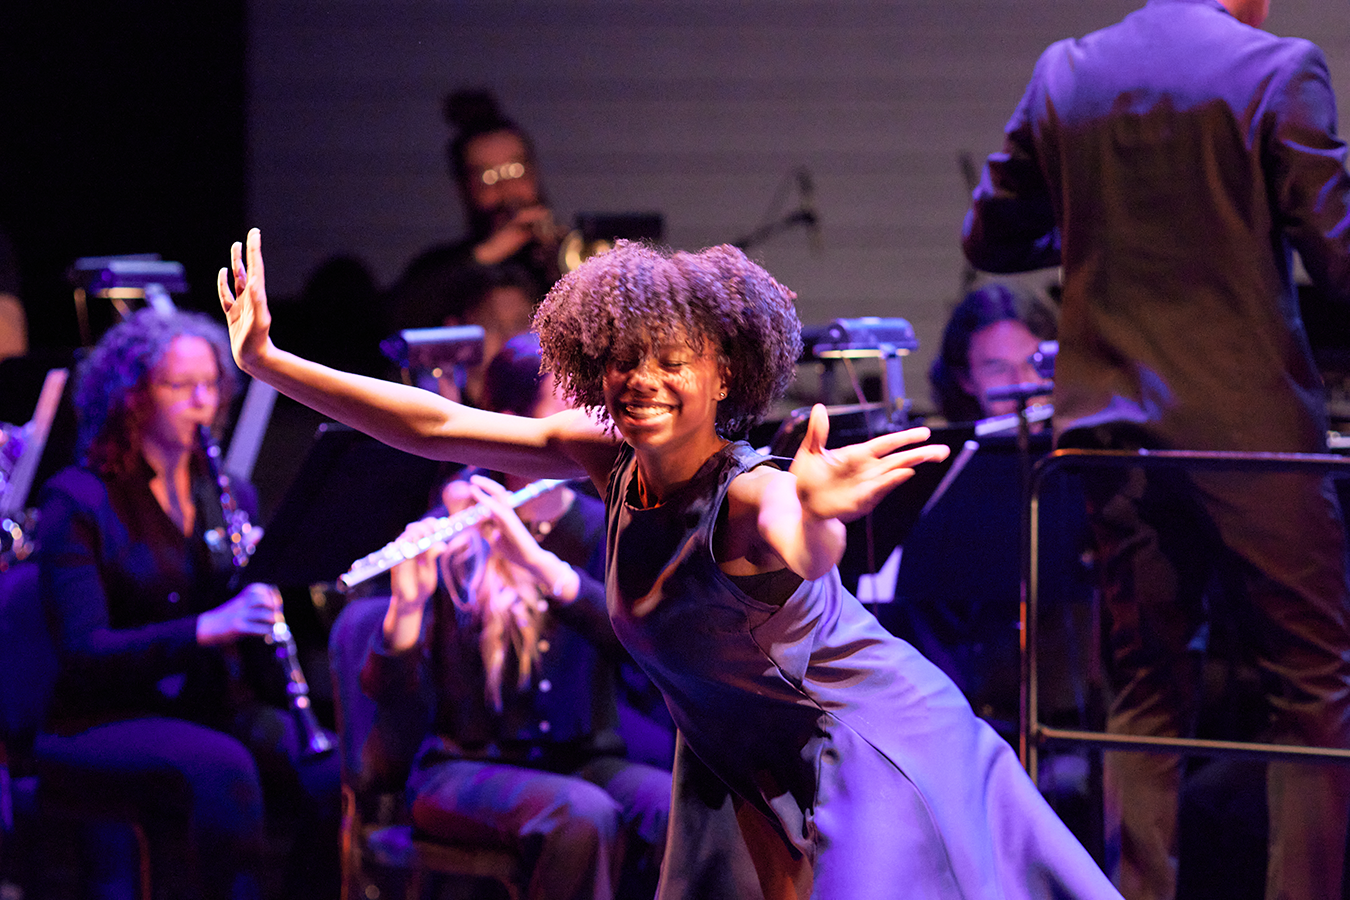 A student from the School of Dance smiles at the audience during the performance of "Come Sunday" by Omar Thomas, performed by the Mason Wind Symphony. Photo by Will Martinez.